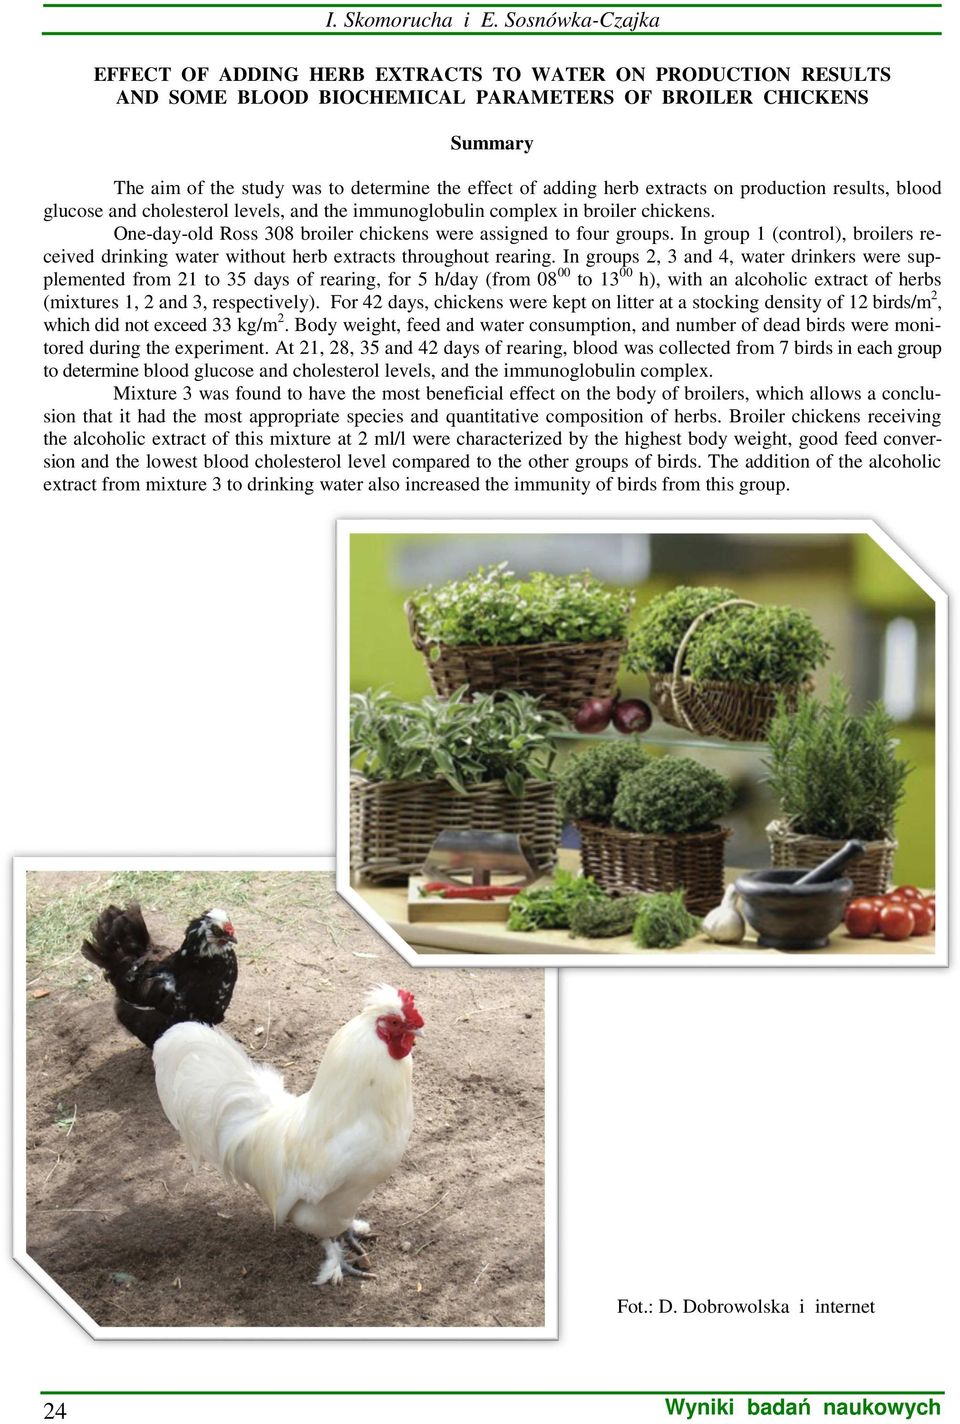 adding herb extracts on production results, blood glucose and cholesterol levels, and the immunoglobulin complex in broiler chickens.